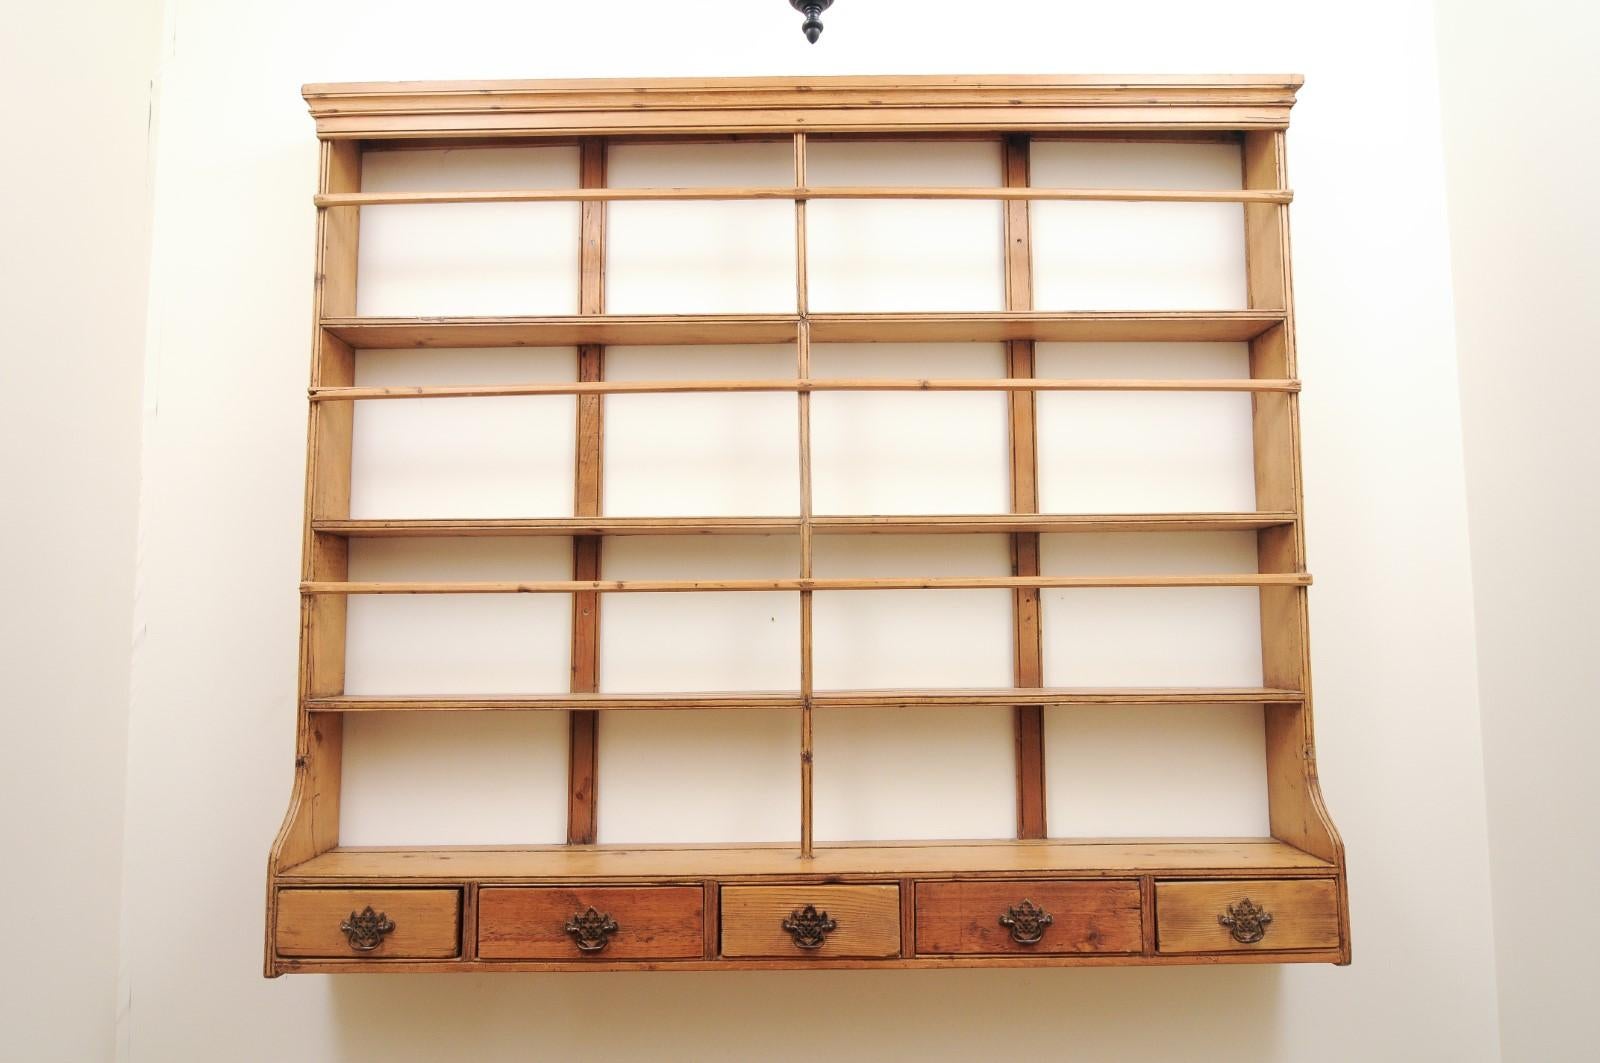 An English Georgian pine wall plate rack from the early 19th century, with low drawers. Created in England at the beginning of King George IV's reign, this wall rack features a linear silhouette perfectly complimented by a rustic appearance. A